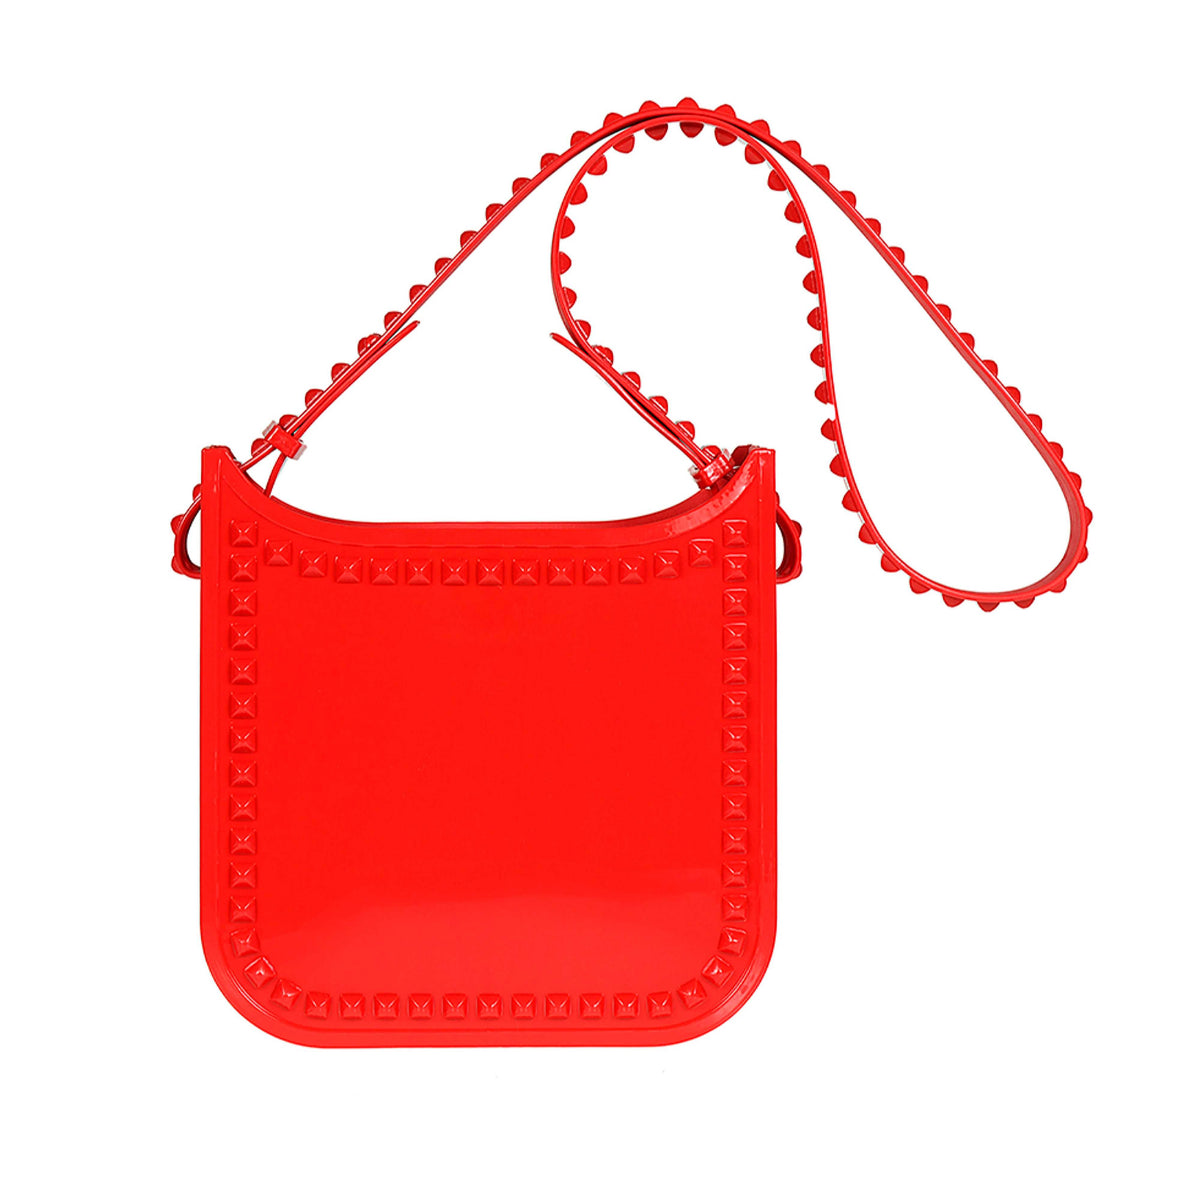 Toni Carmen sol beach bags for women in color red